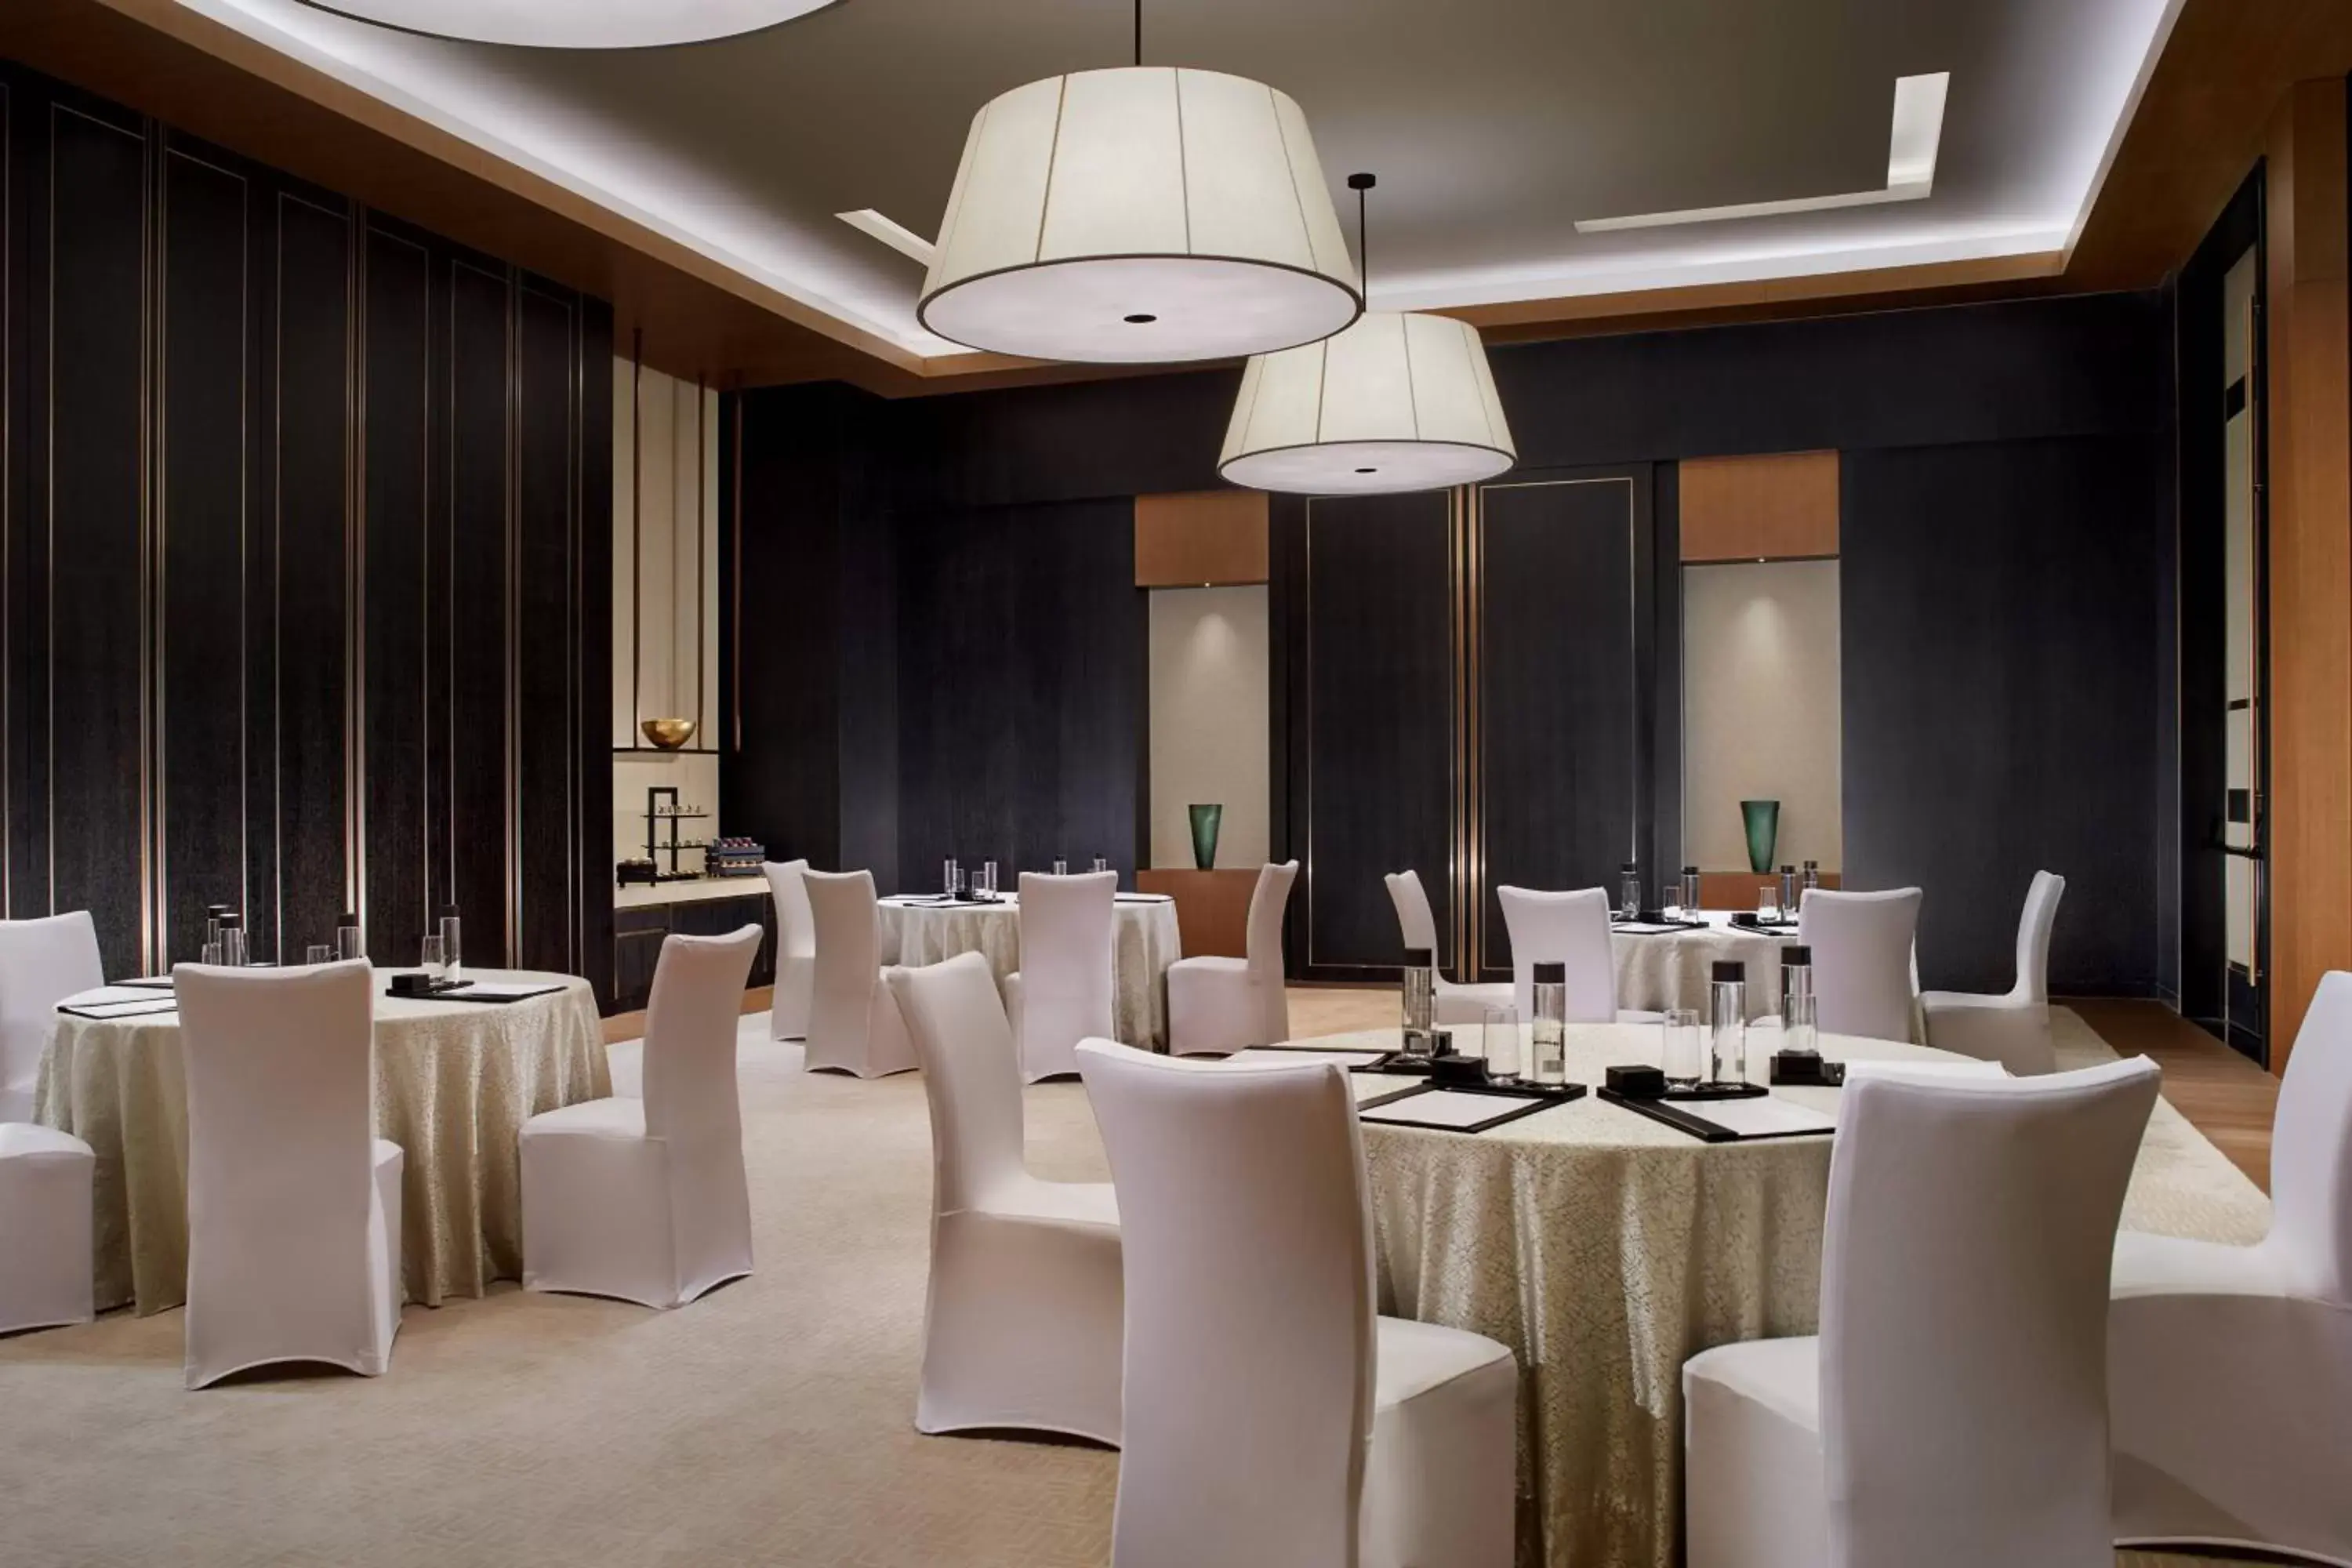 Meeting/conference room, Banquet Facilities in The Ritz-Carlton, Xi'an